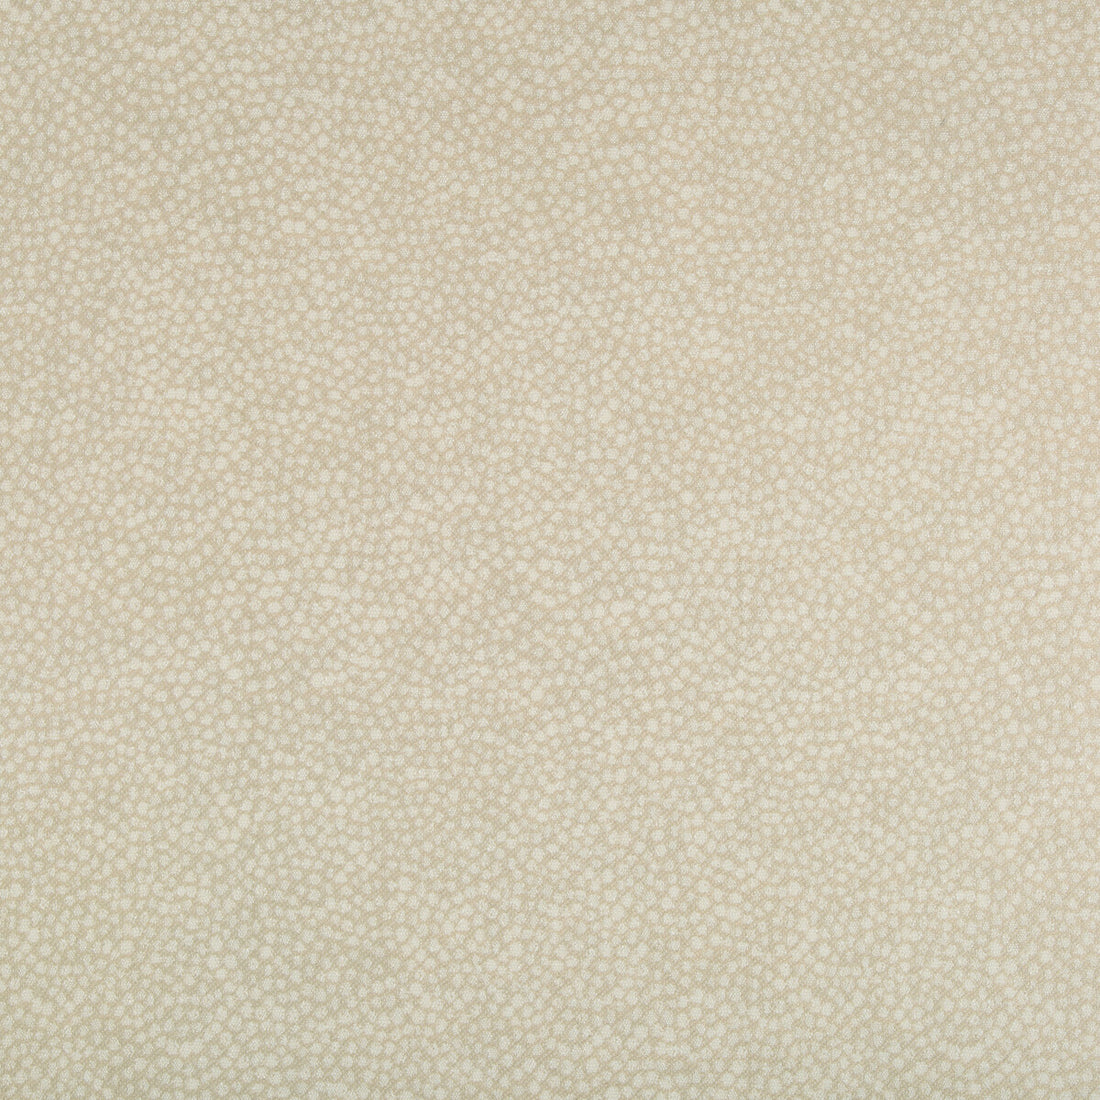 Pebbledot fabric in sand color - pattern 35064.16.0 - by Kravet Basics in the Jeffrey Alan Marks Oceanview collection